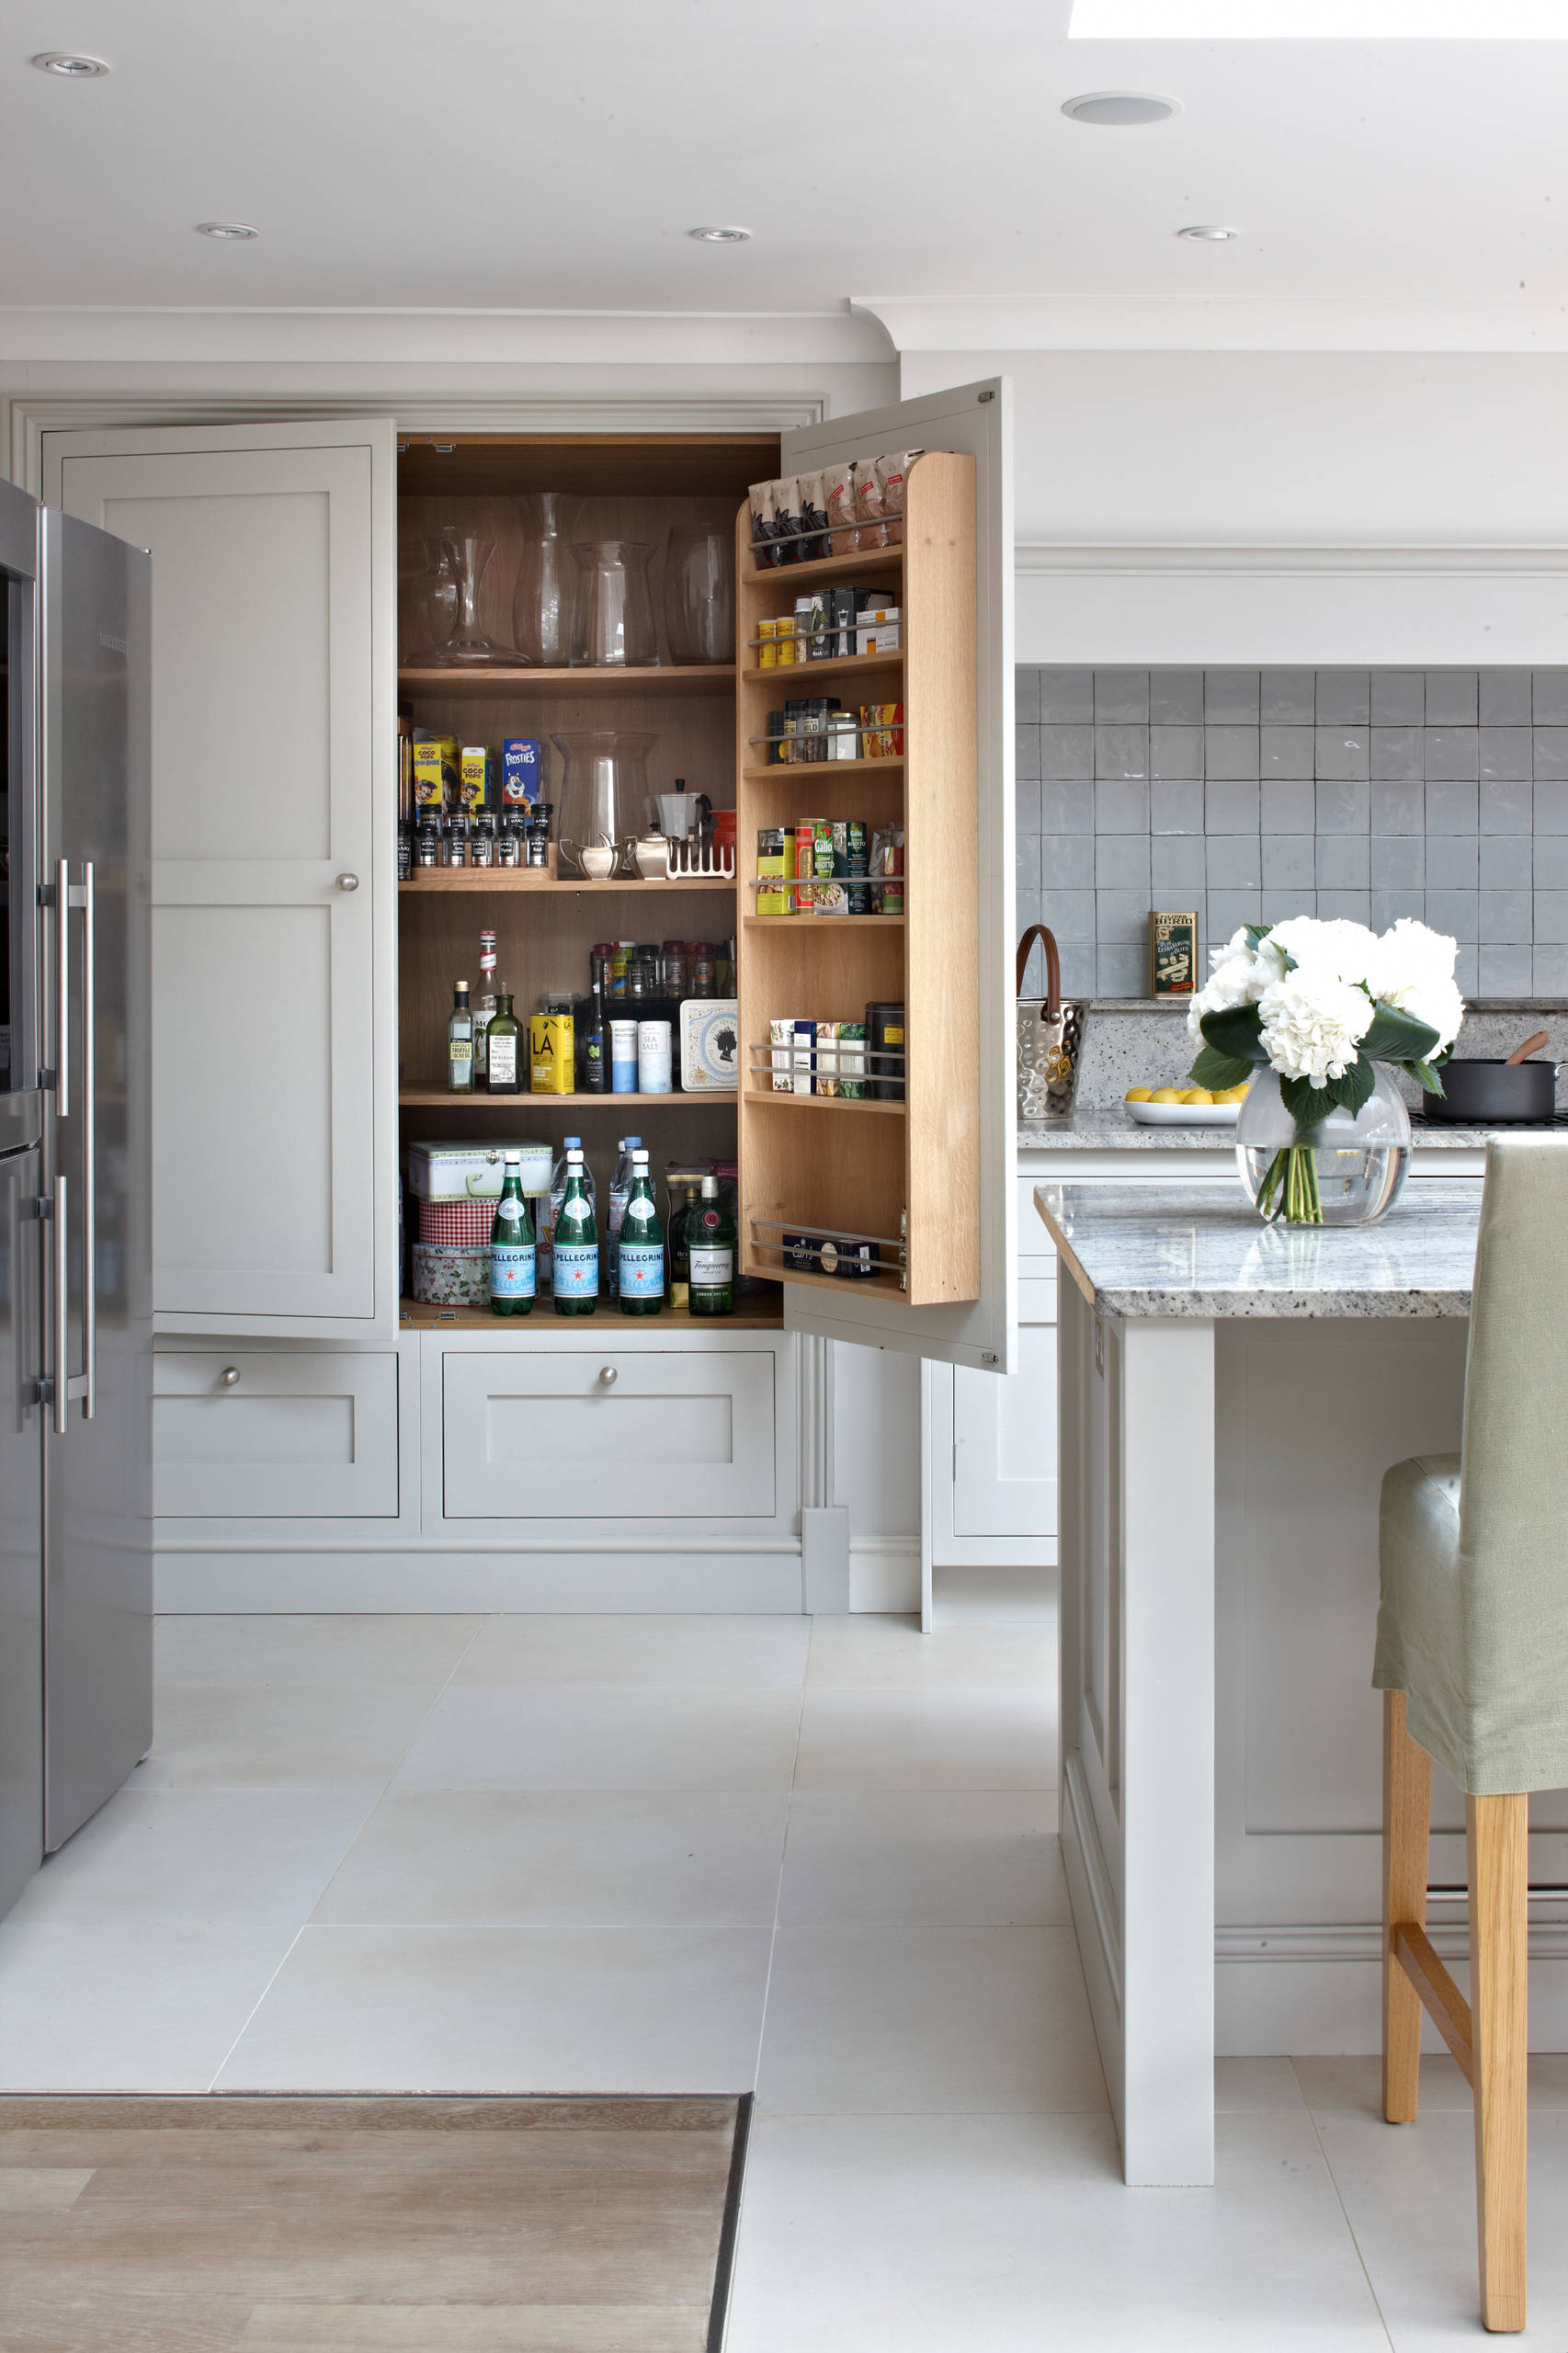 Pantry Storage Cabinets Built for Busy Kitchens